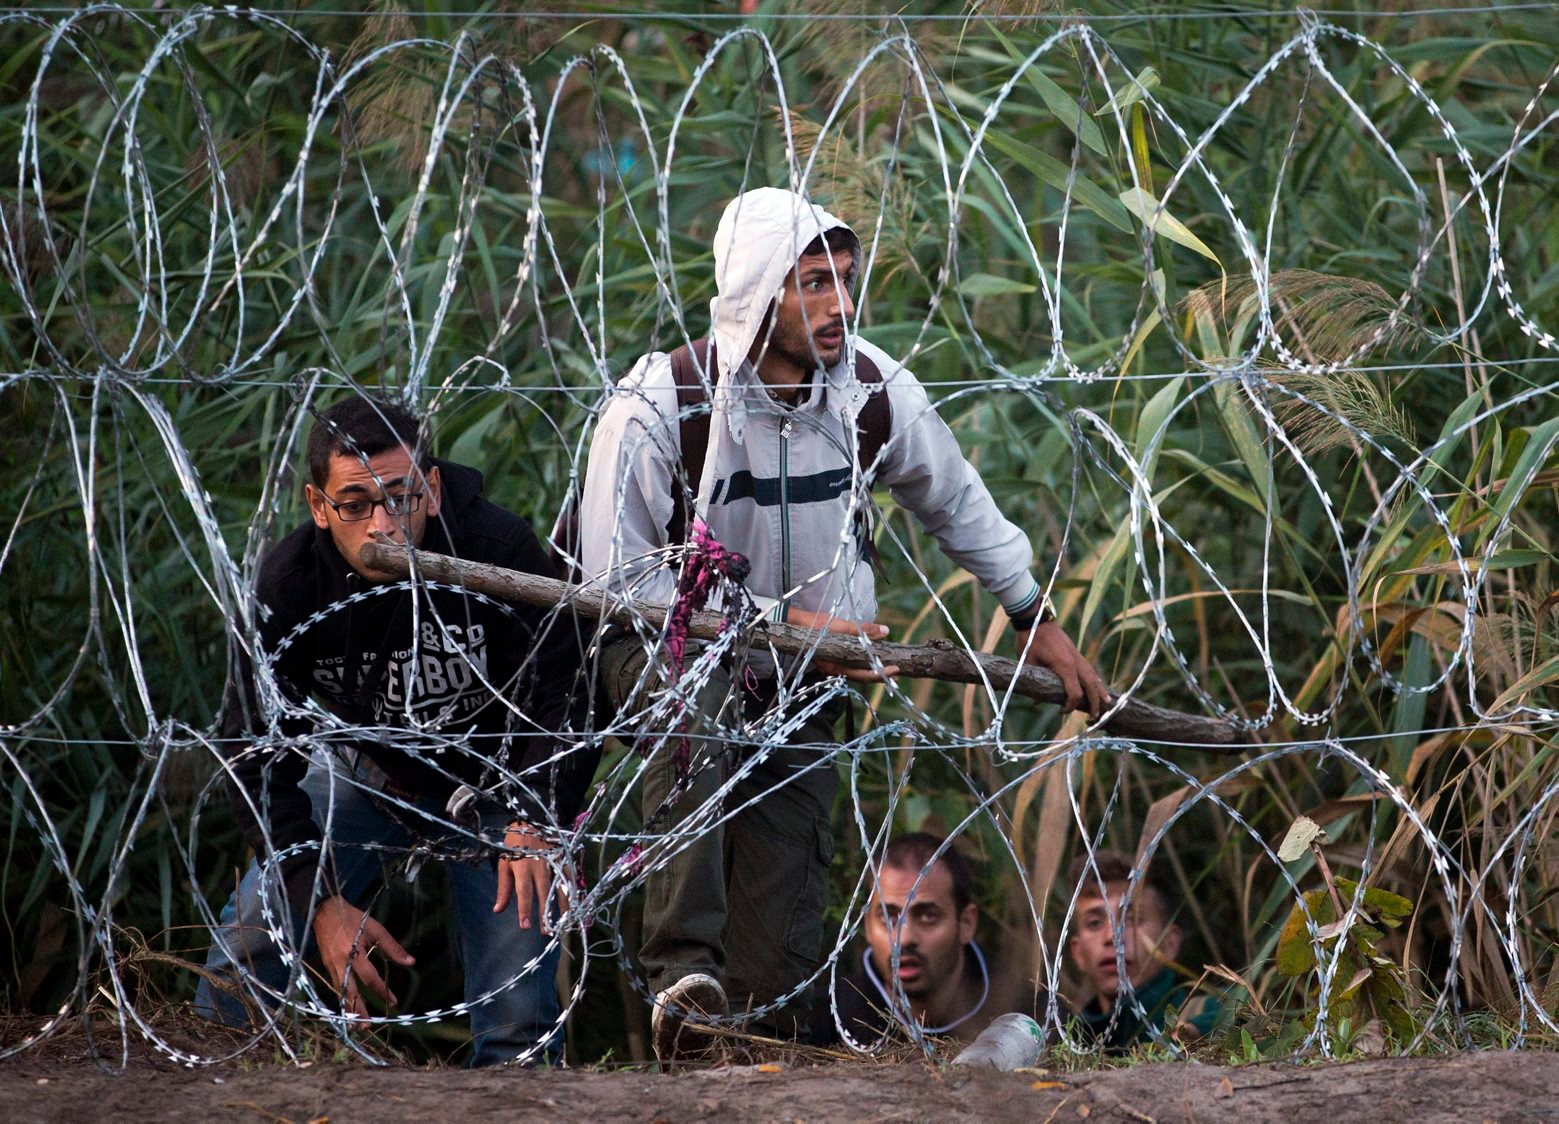 Syrian refugees get ready to enter Hungary from Serbia, on the border near Roszke, Friday, Aug. 28, 2015. Hungary deployed police reinforcements to rein in an unrelenting flow of migrants across its porous border Thursday, but refugee activists said the effort appeared futile in a nation whose migrant camps are overloaded and barely delay their journeys west into the heart of the European Union. (AP Photo/Darko Bandic) Hungary Migrants